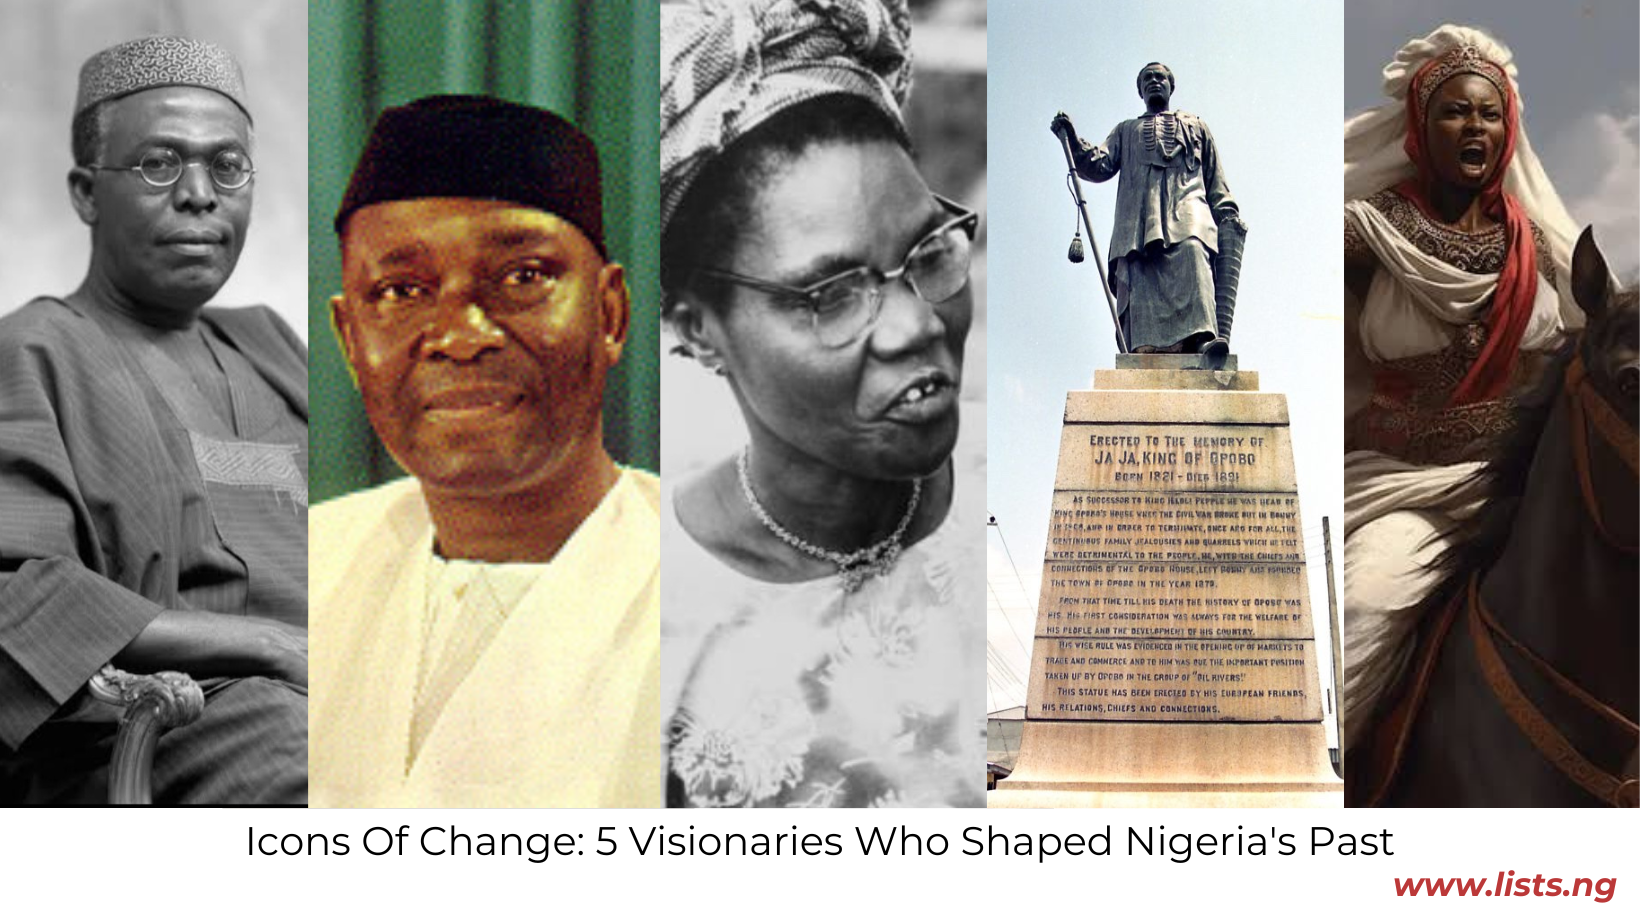 Icons Of Change: 5 Visionaries Who Shaped Nigeria's Past